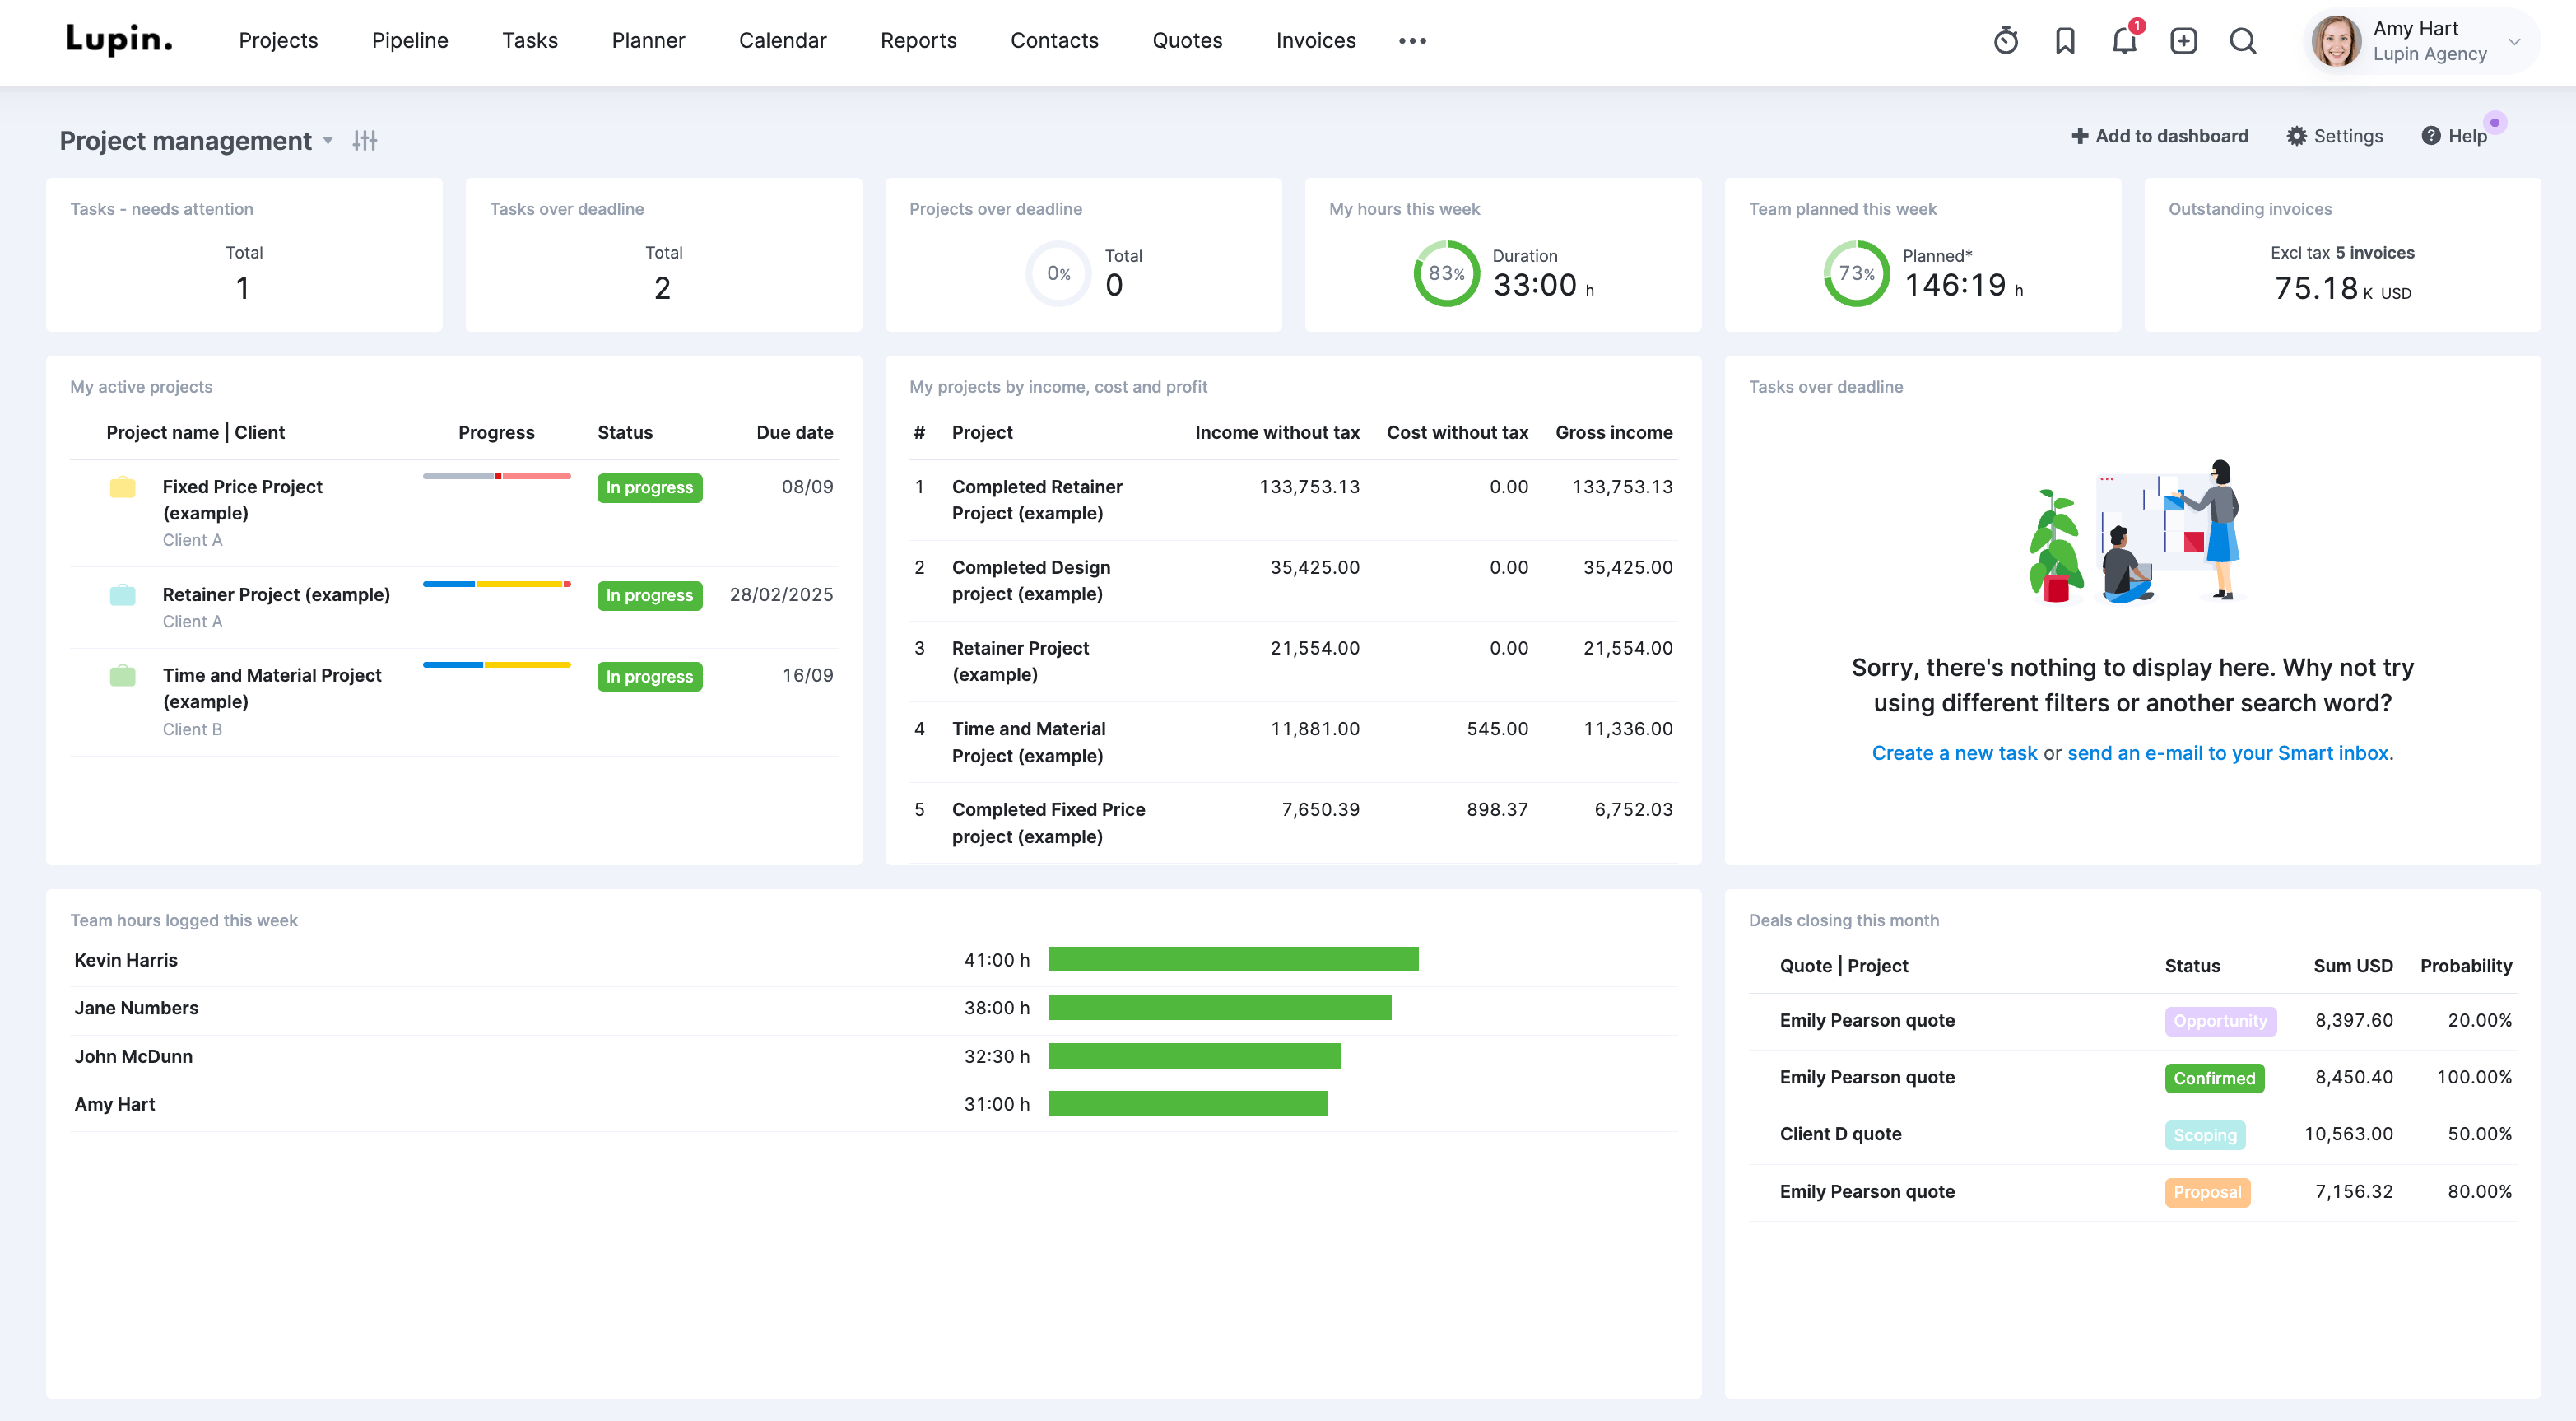 Project management dashboard in Scoro